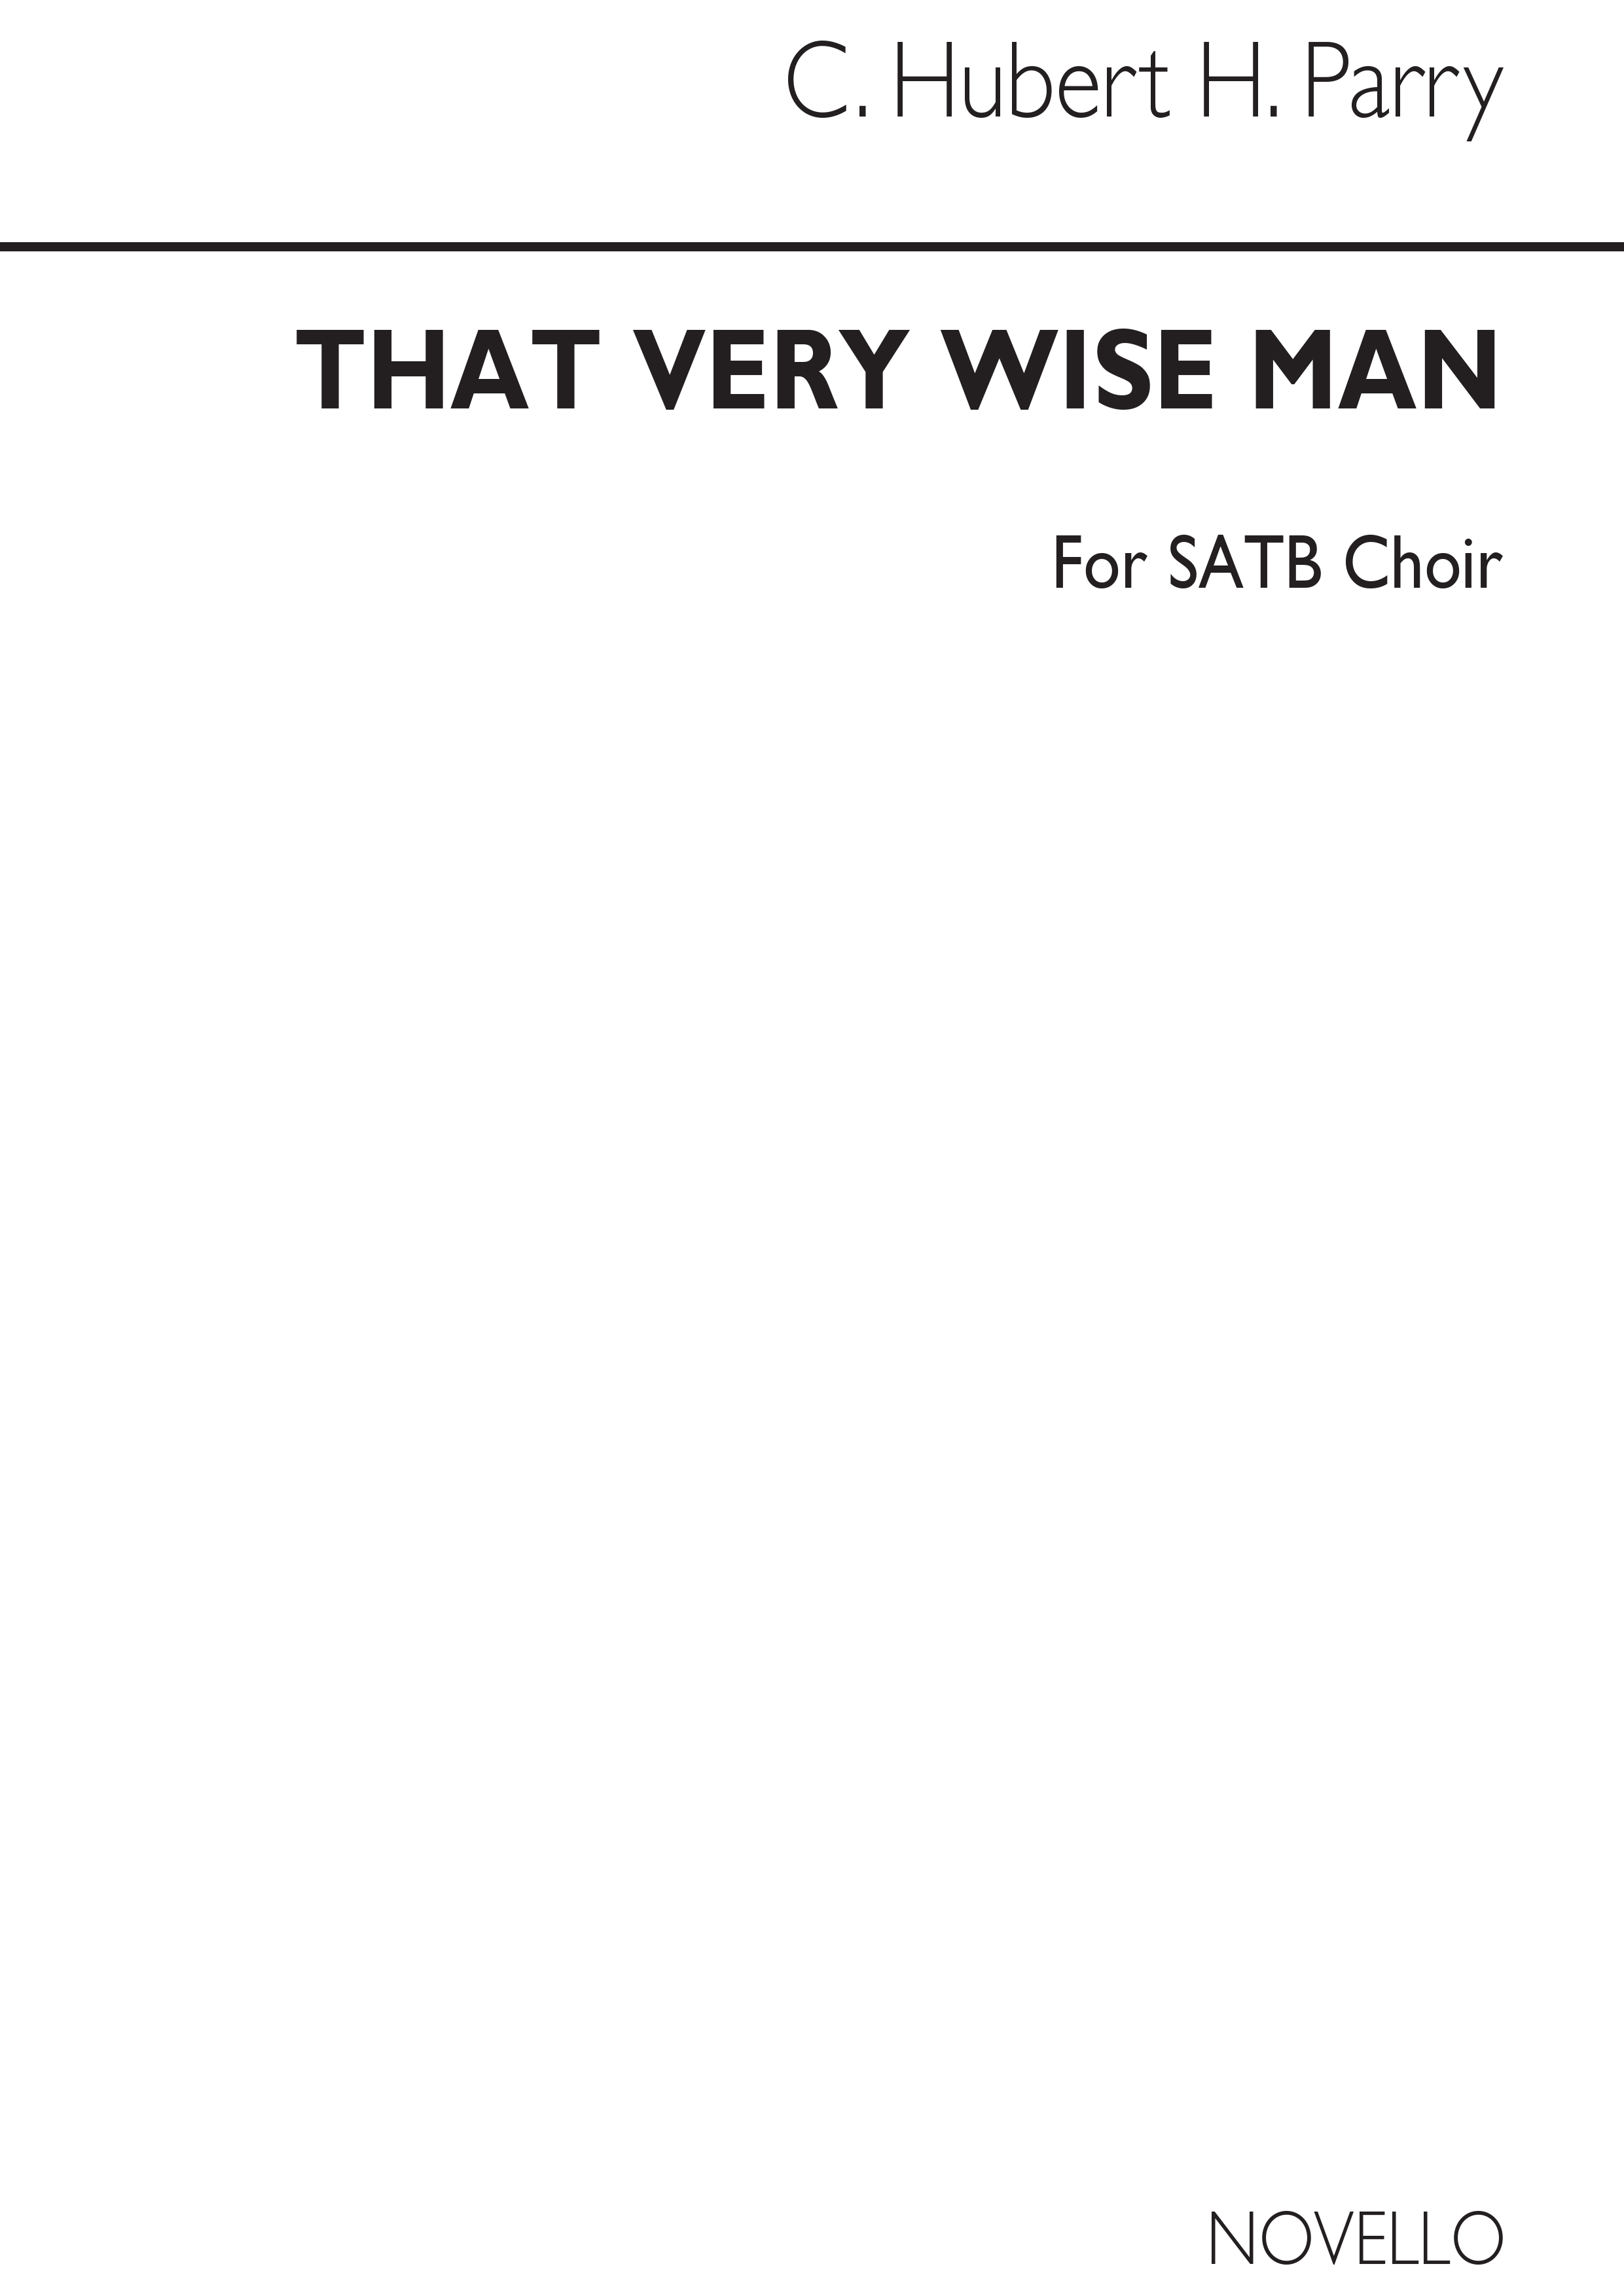 Hubert Parry: That Very Wise Man: SATB: Vocal Score